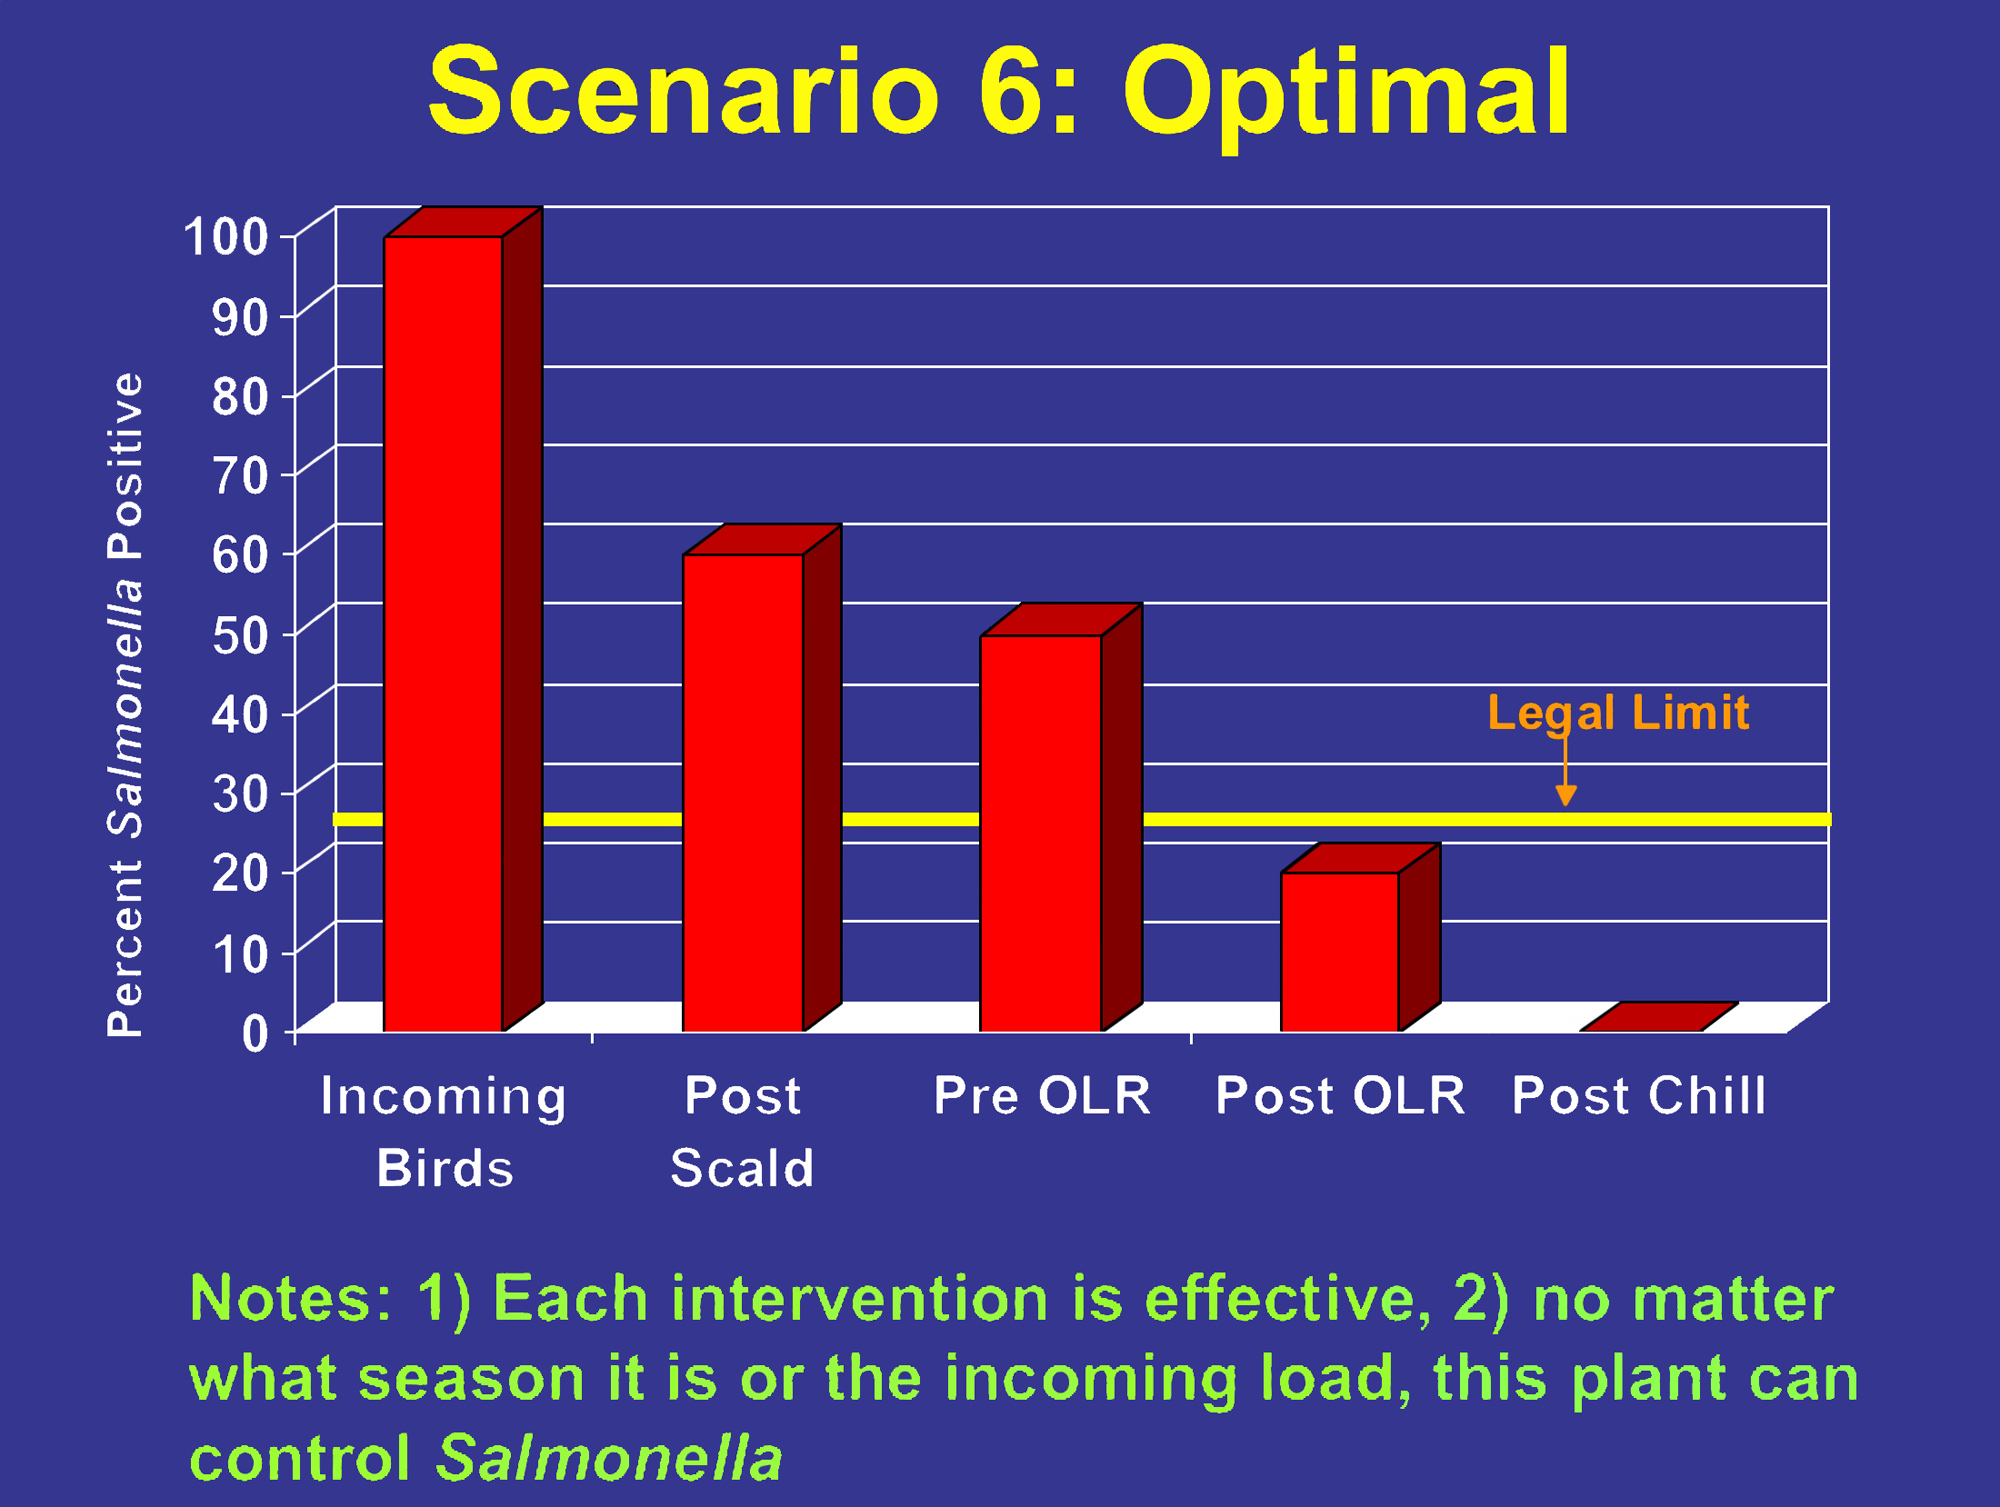 Bar graph showing percent of birds positive for salmonella throughout the plant process. All incoming birds are positive. Post scald, around 60% are positive. Pre OLR, around 50% are positive. Post OLR, around 20% are positive, below the legal limit. Post chill, none of the birds are positive